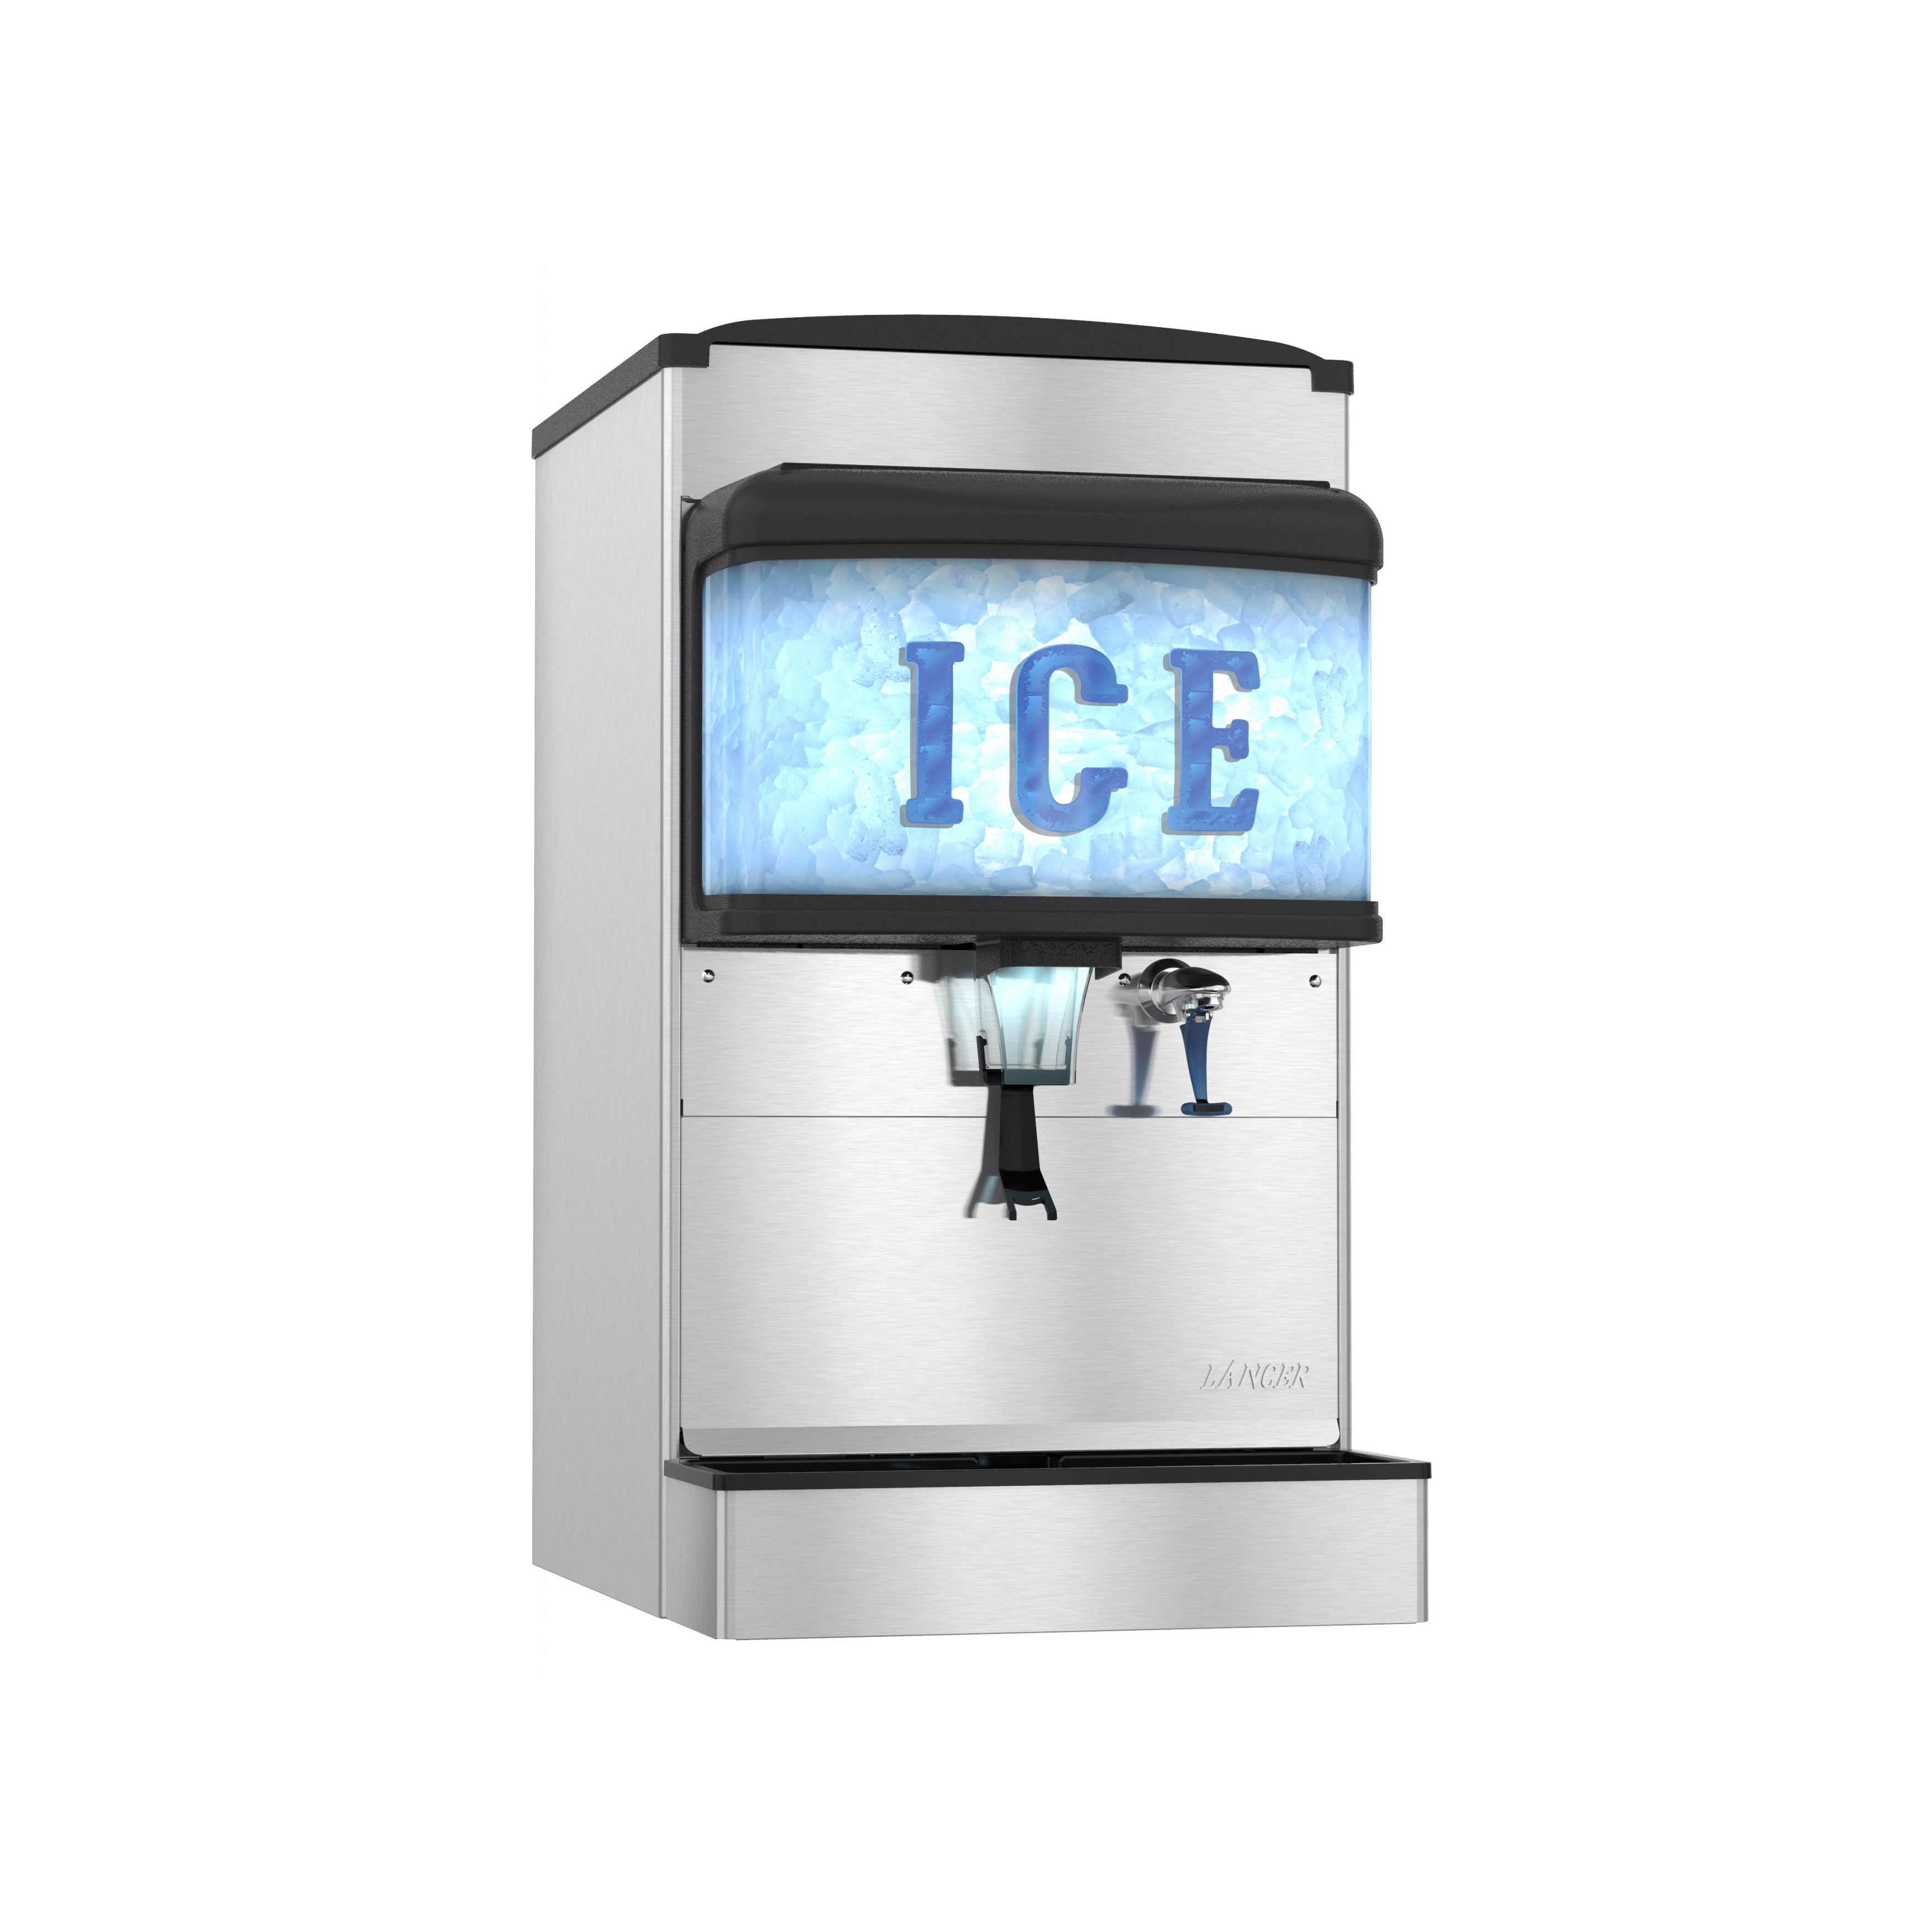 Hoshizaki - DM-4420N, Commercial 22" Countertop Cubelet Ice and Water Dispenser - 200 lb. Ice Storage Capacity